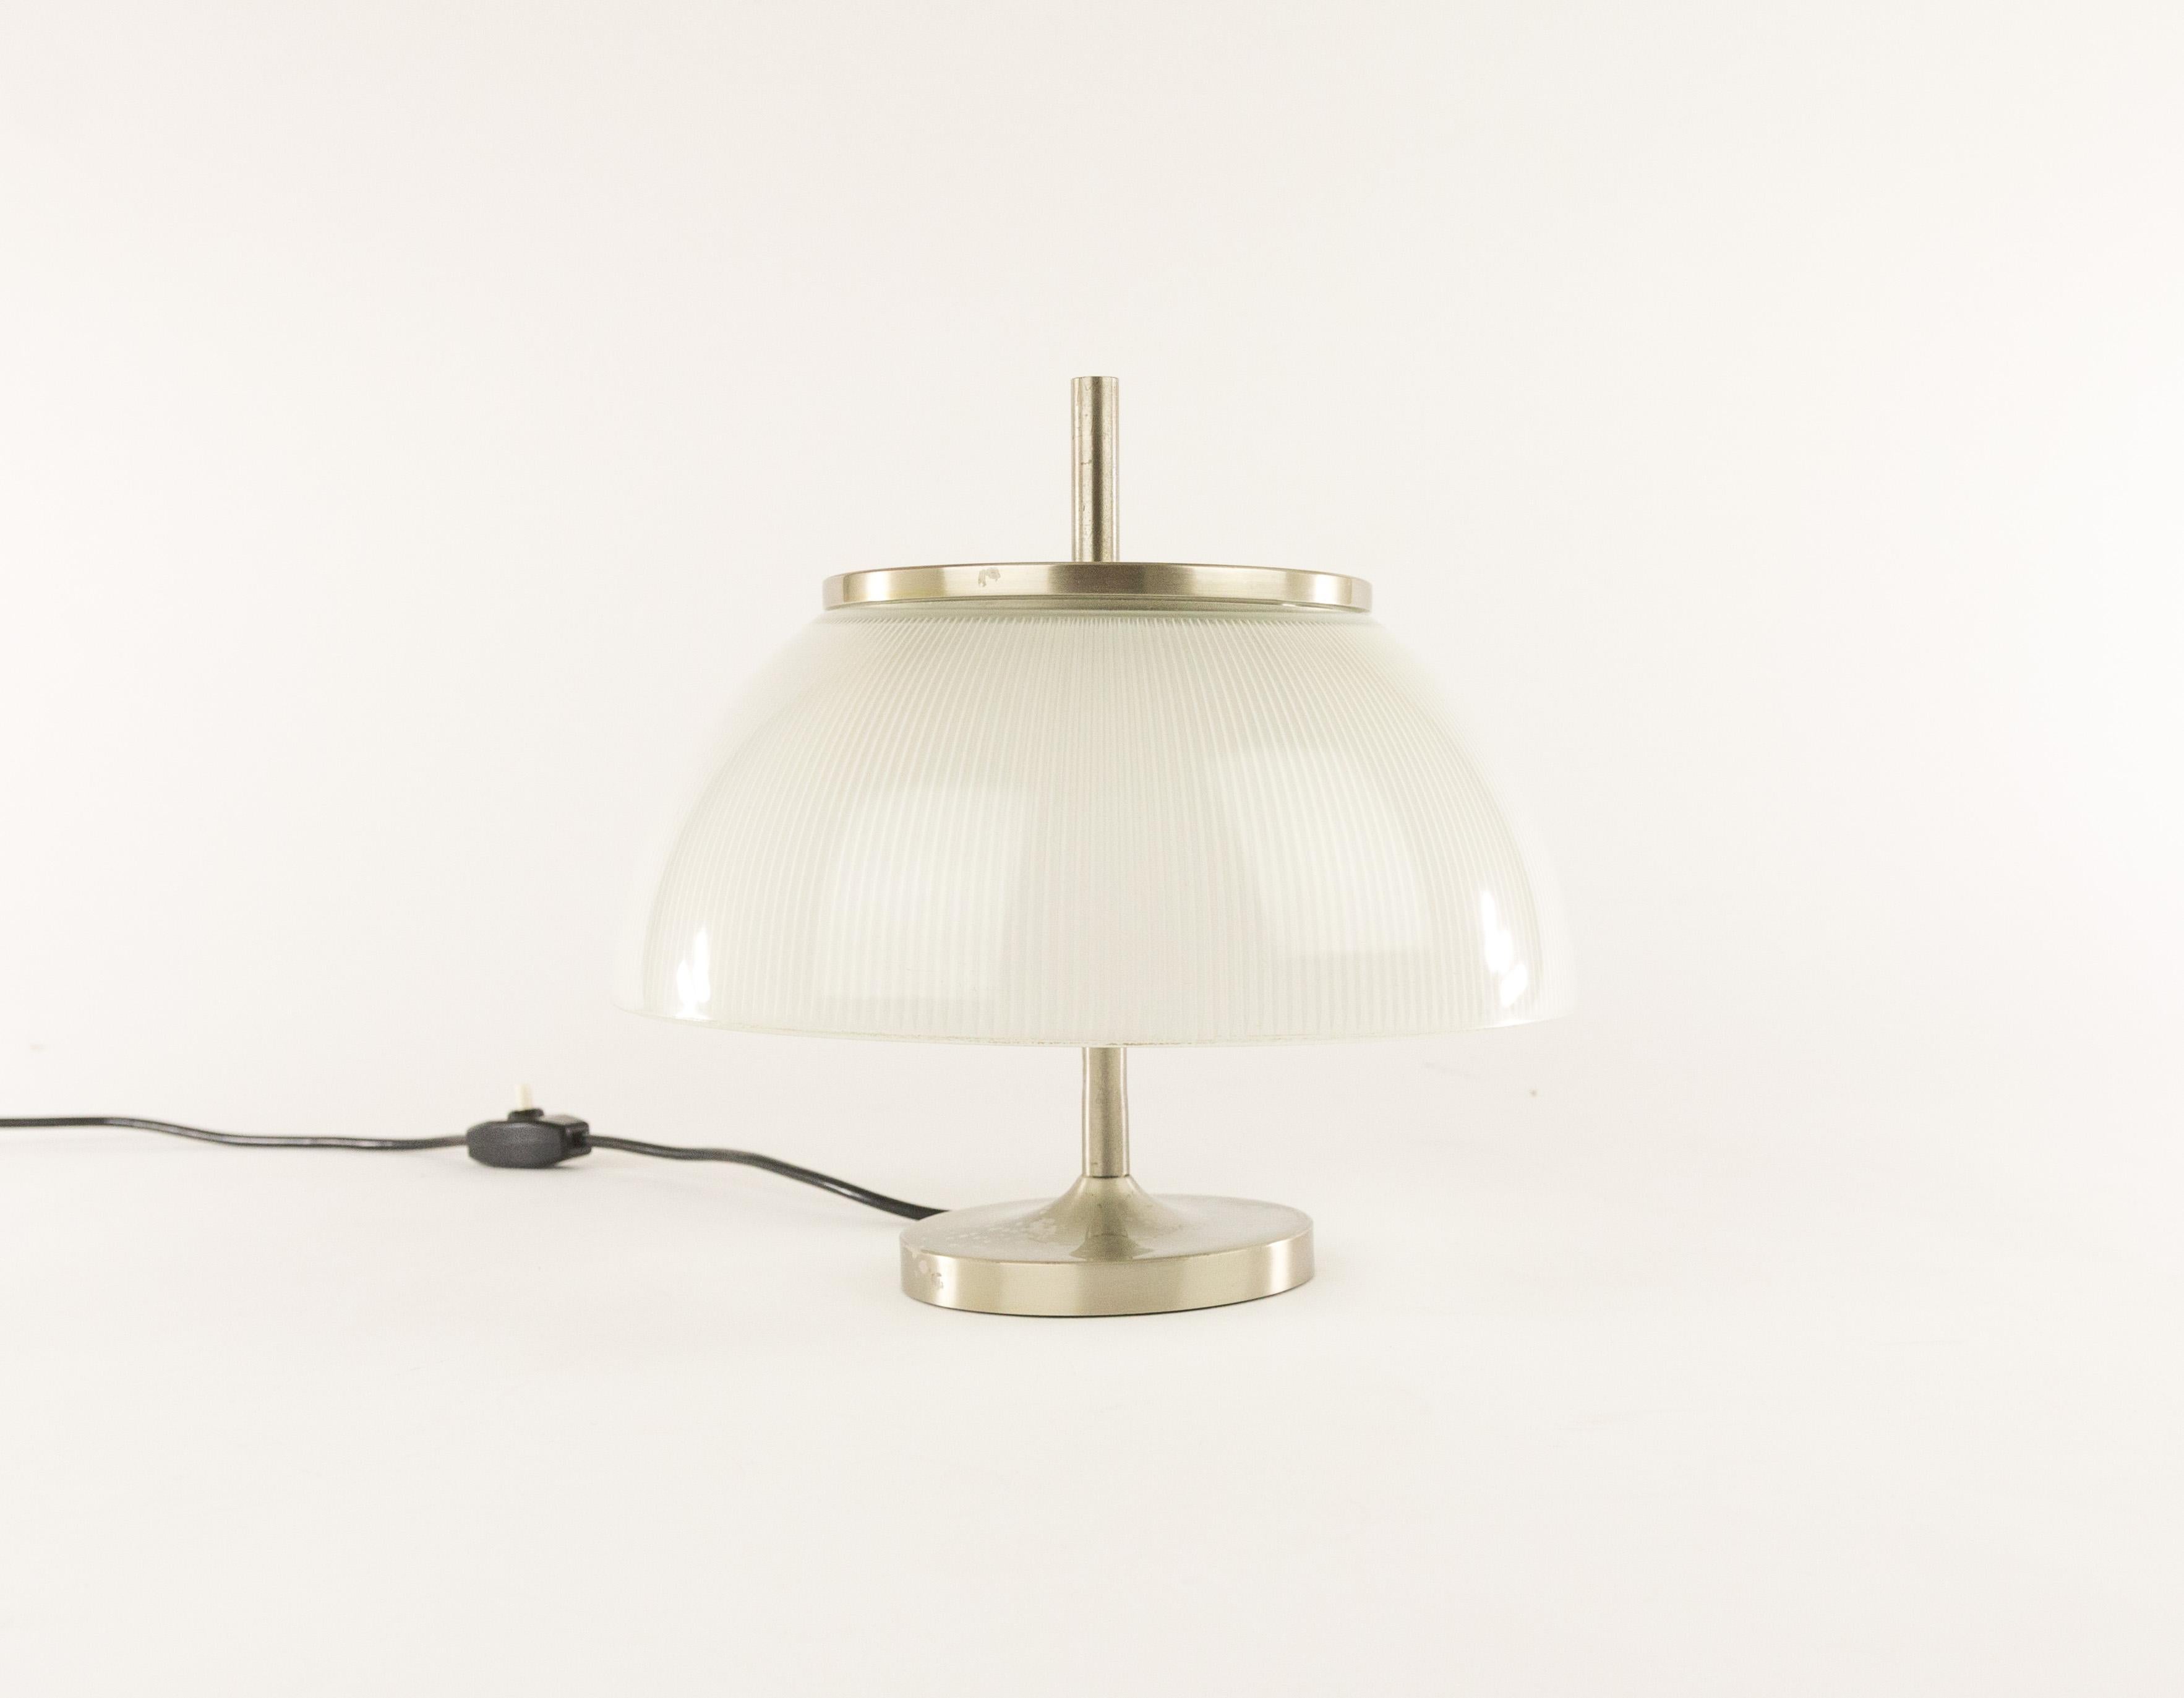 Elegant Alfetta table lamp designed by Sergio Mazza for Italian lighting manufacturer Artemide. The glass of the lamp is frosted internally and the structure is made from metal. The nickel top layer and the base of the lamps have some